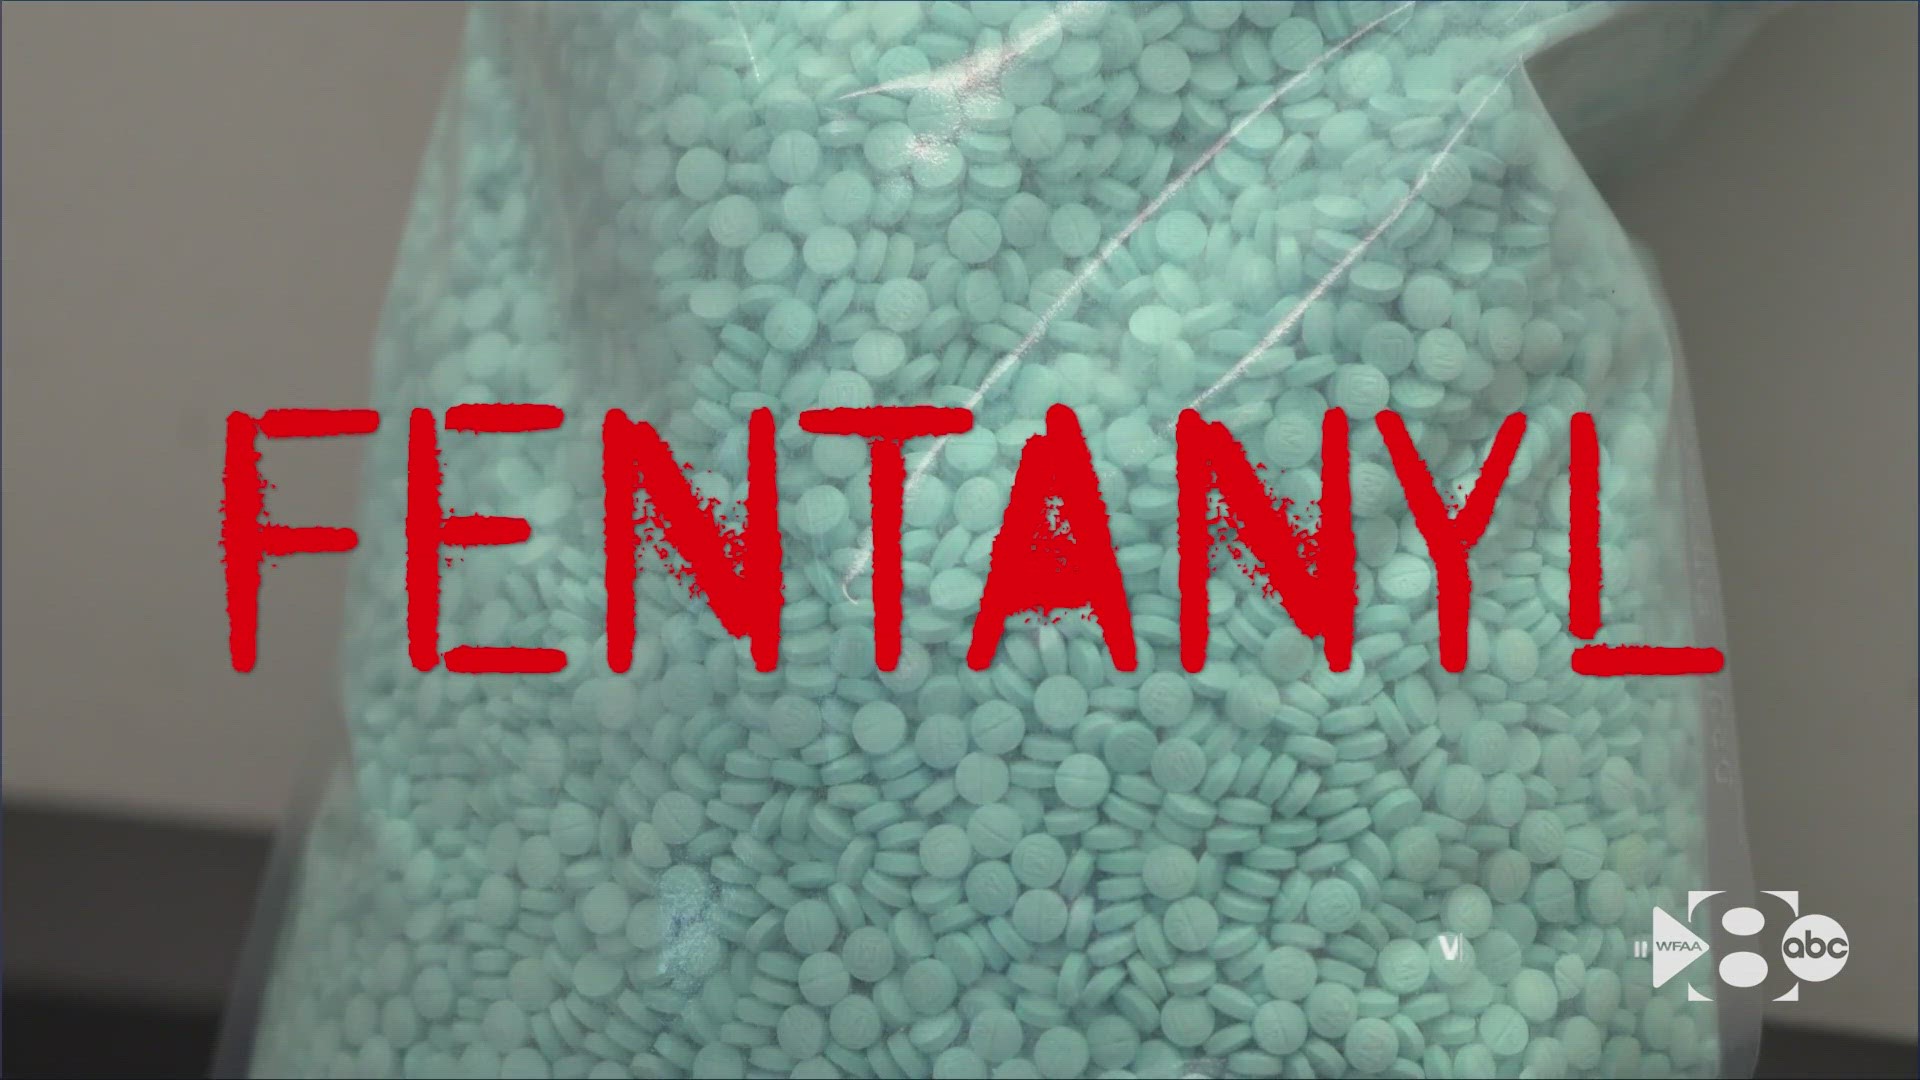 Why is fentanyl so deadly? What was it originally for?